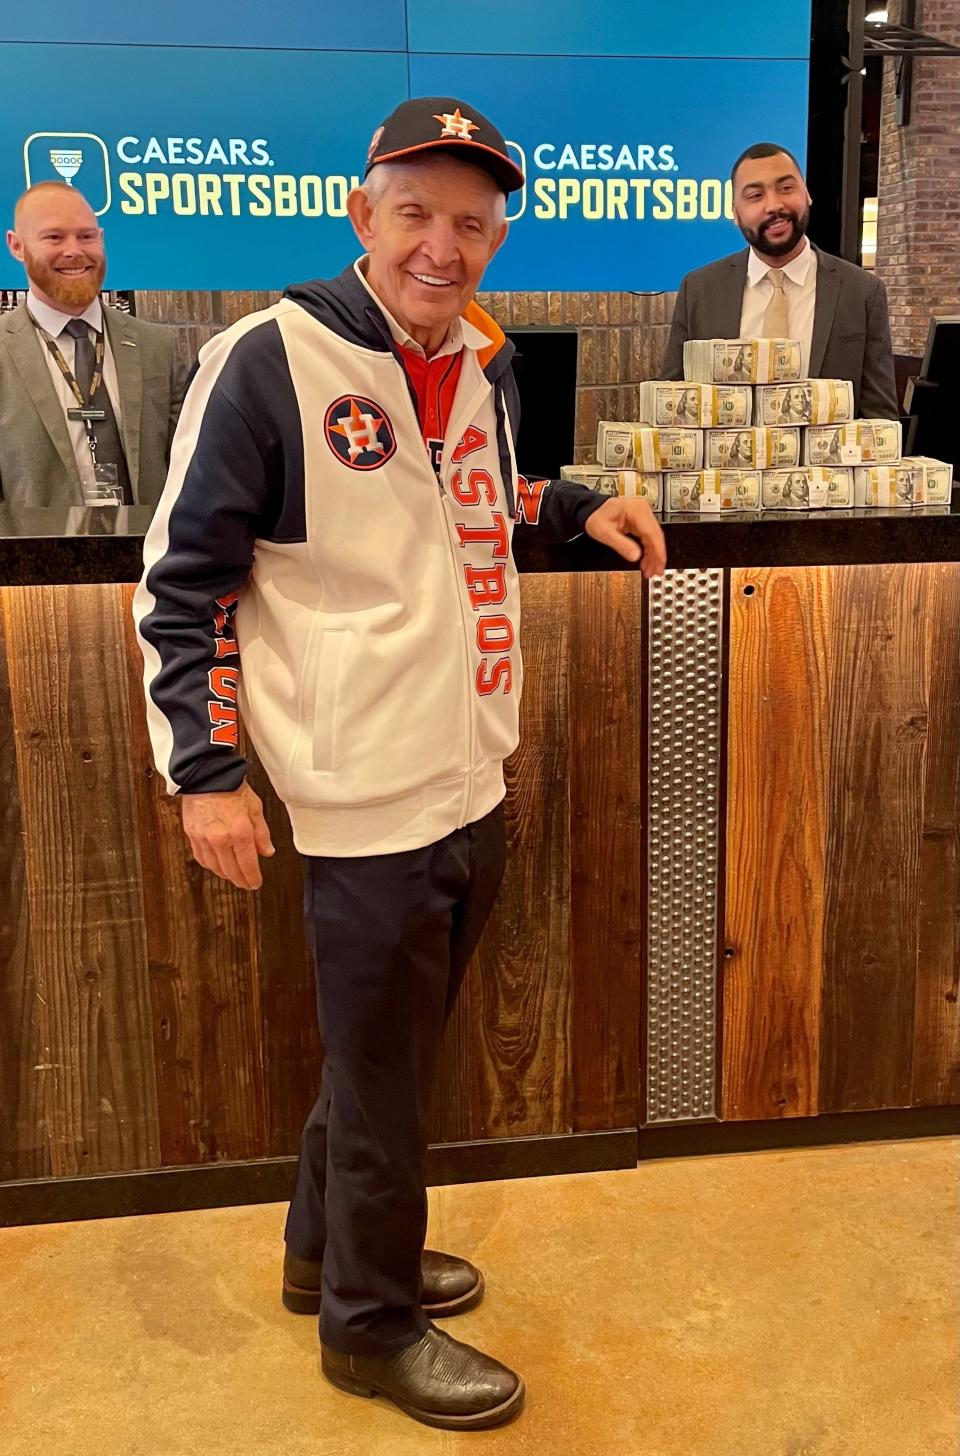 Jim McIngvale, also known as Mattress Mack, placed a $1 million bet at the Horseshoe Casino in Westlake, La., on Dec. 12, 2022 on the Houston Cougars to win the men's Final Four.